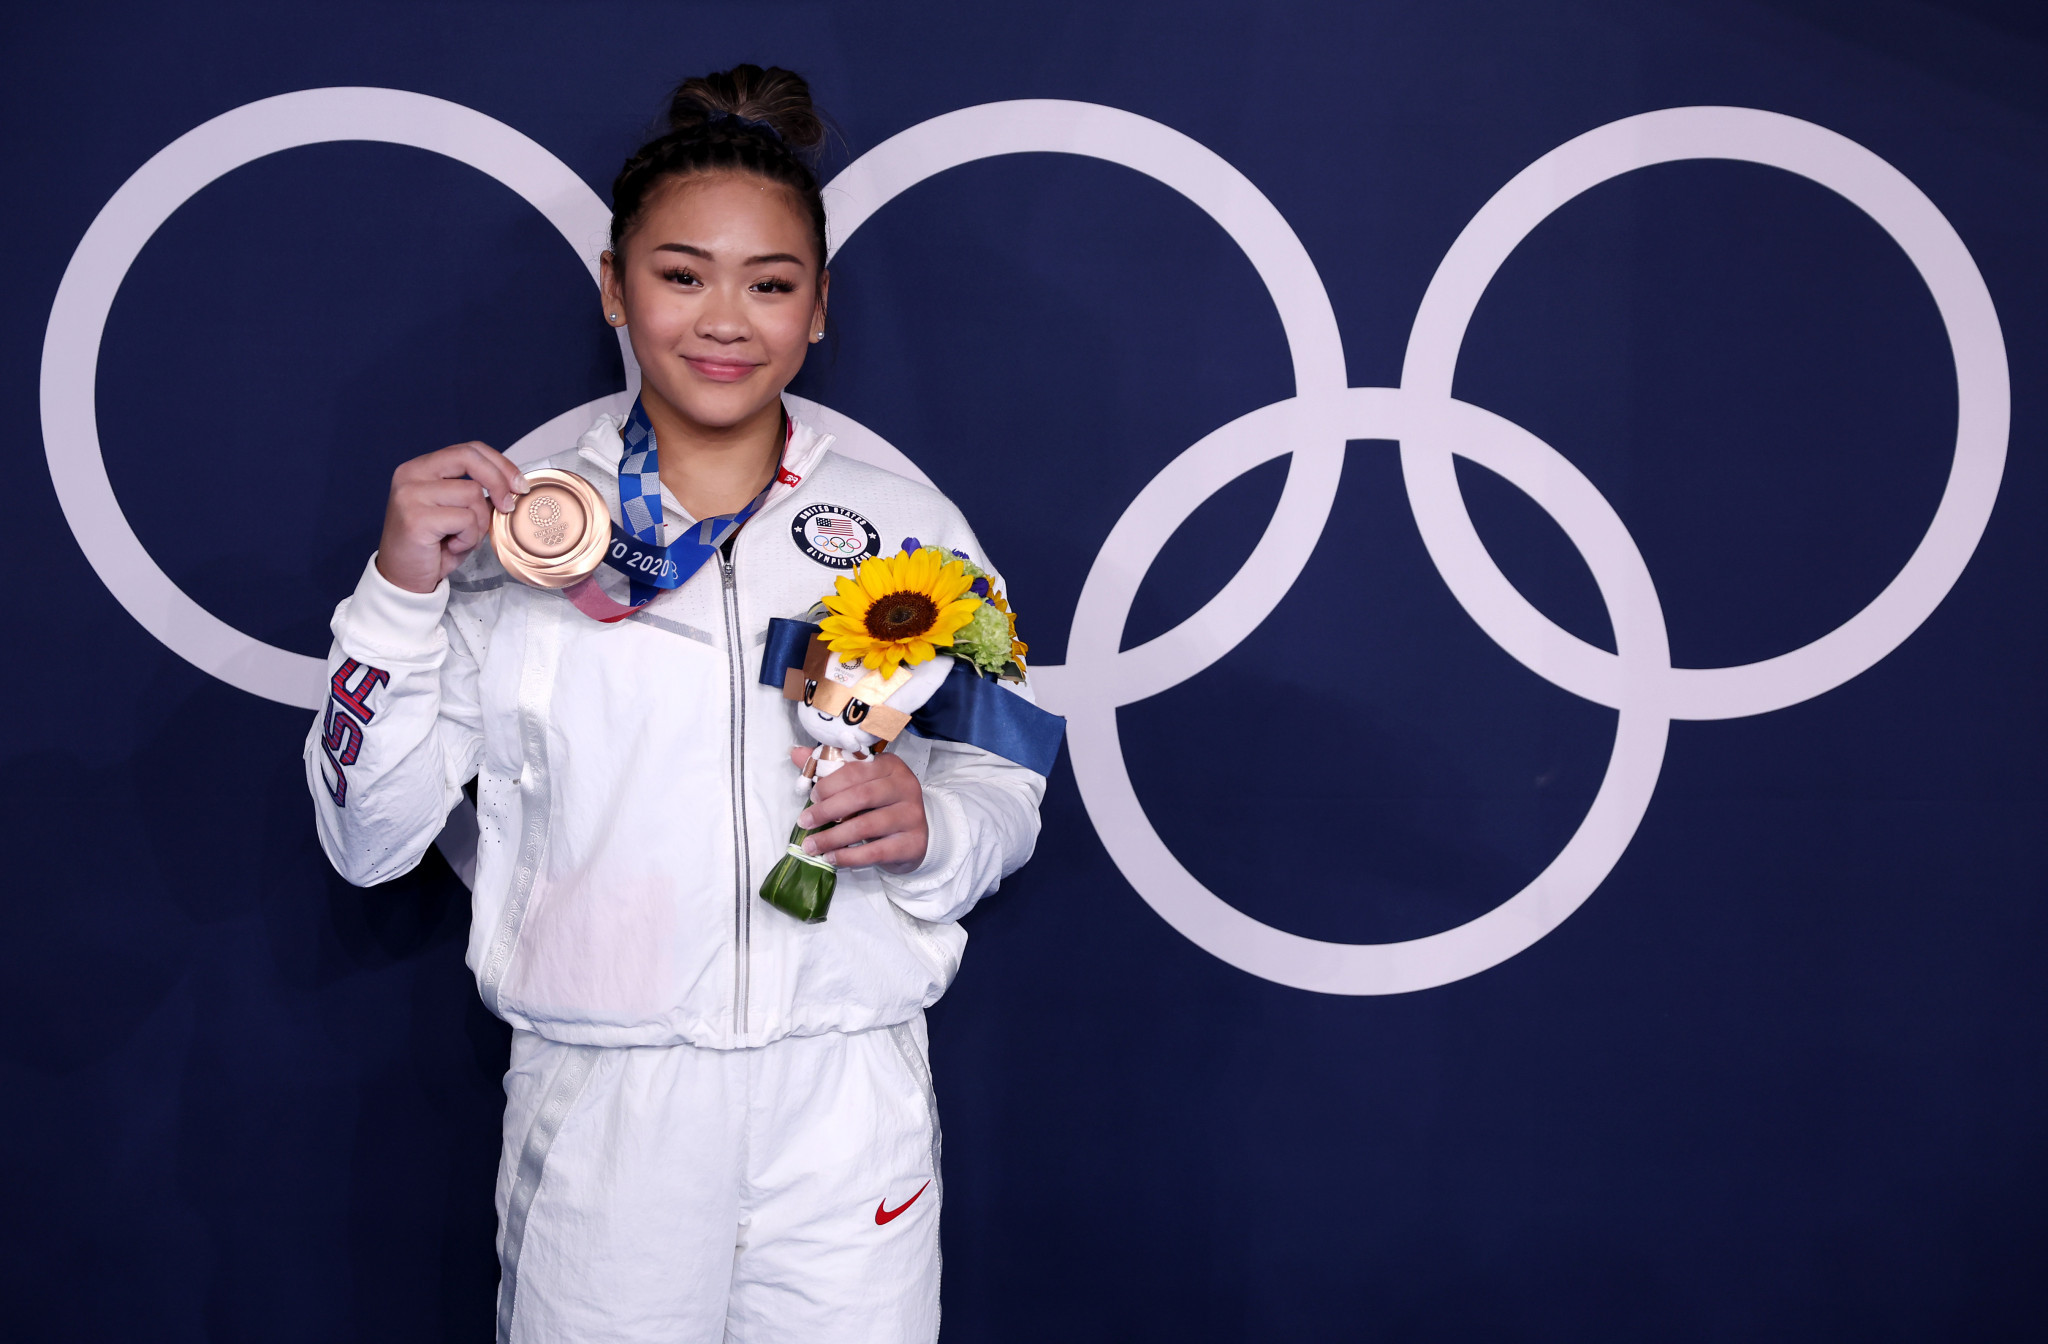 Sunisa Lee won the all-around title at Tokyo 2020 ©Getty Images